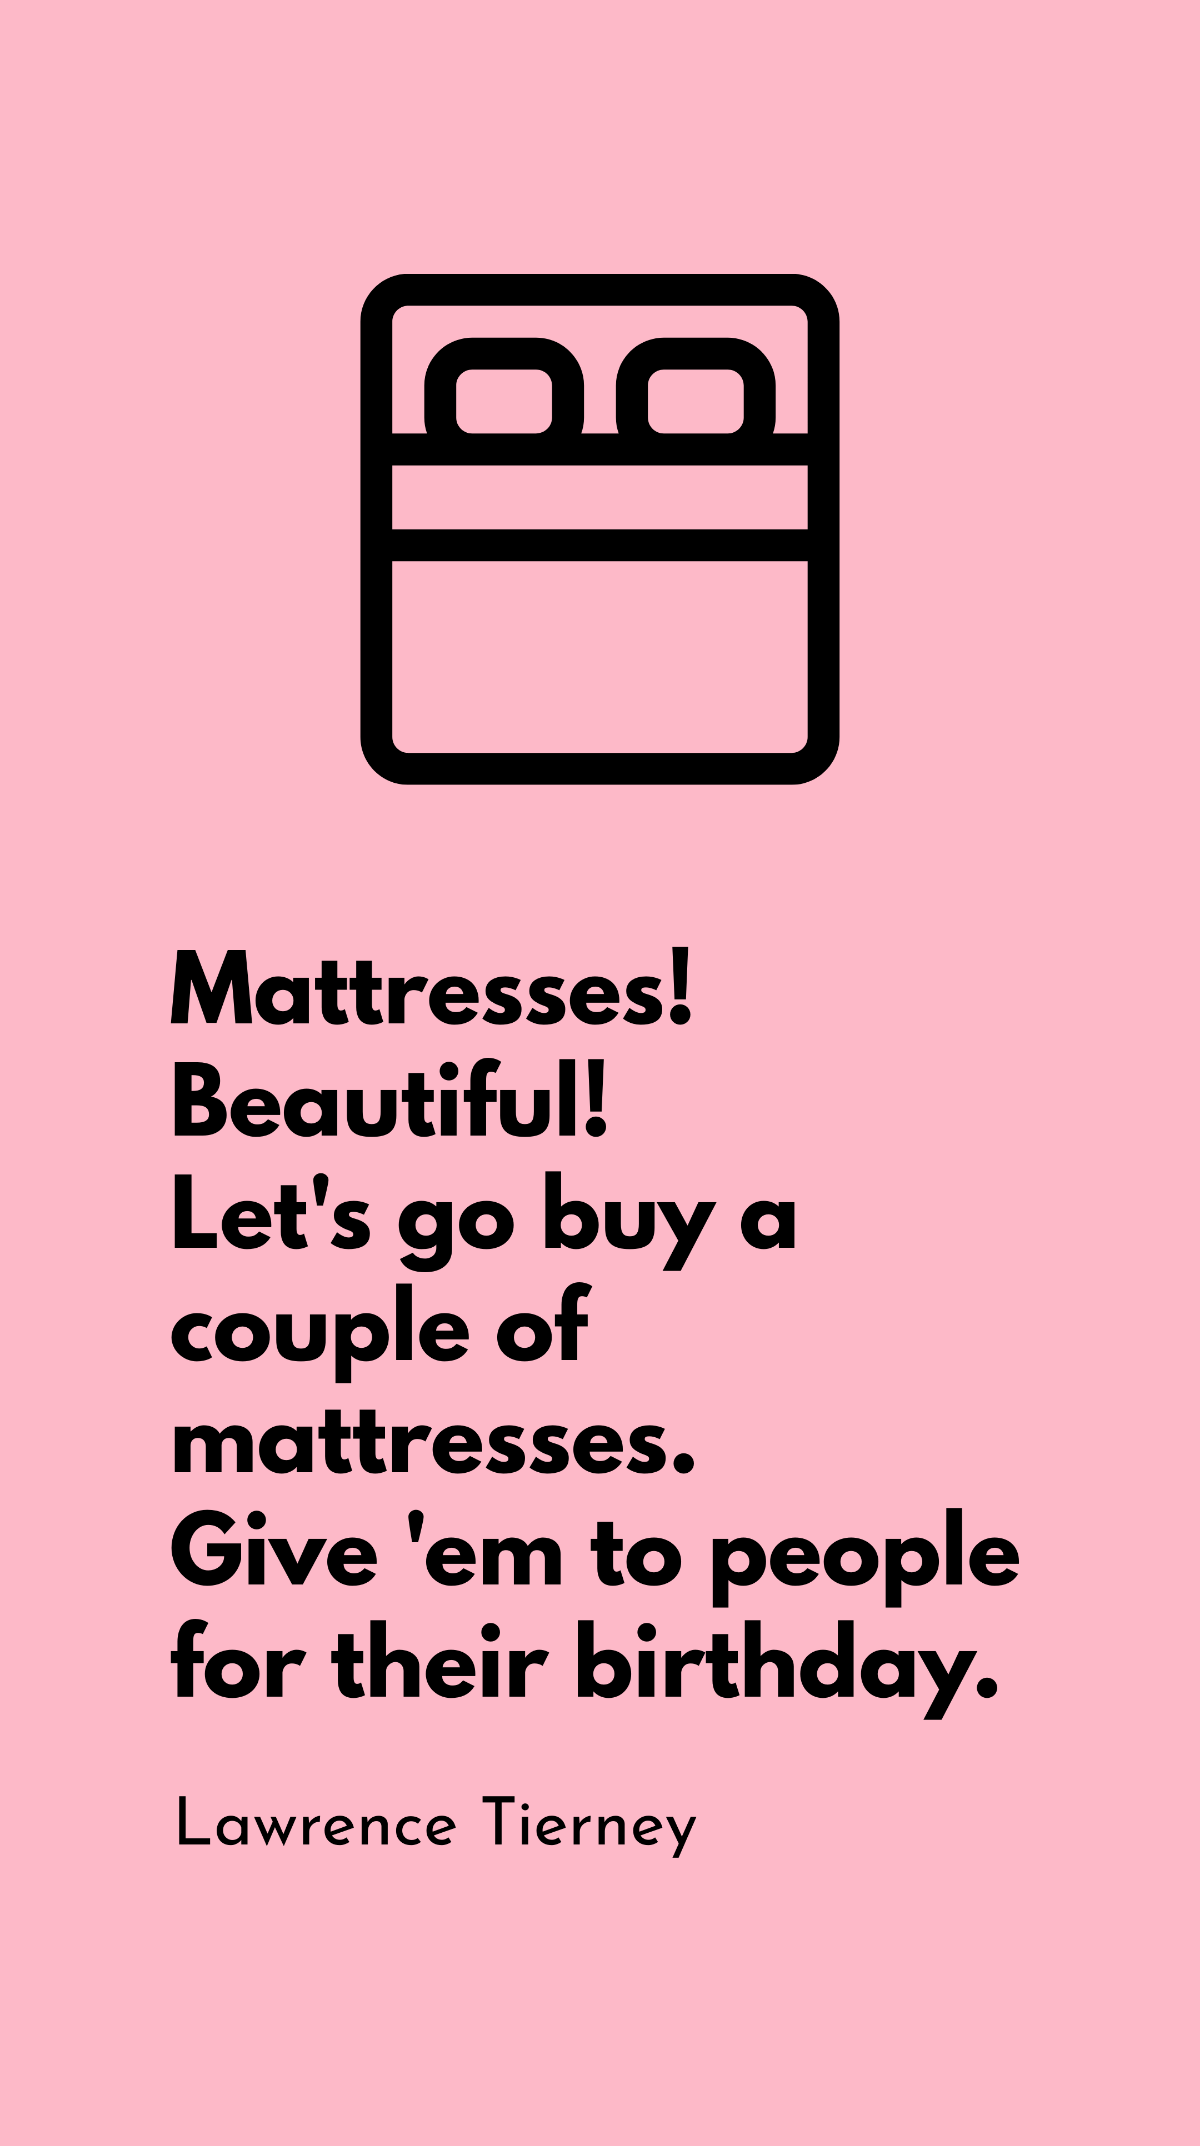 Lawrence Tierney - Mattresses! Beautiful! Let's go buy a couple of mattresses. Give 'em to people for their birthday. Template